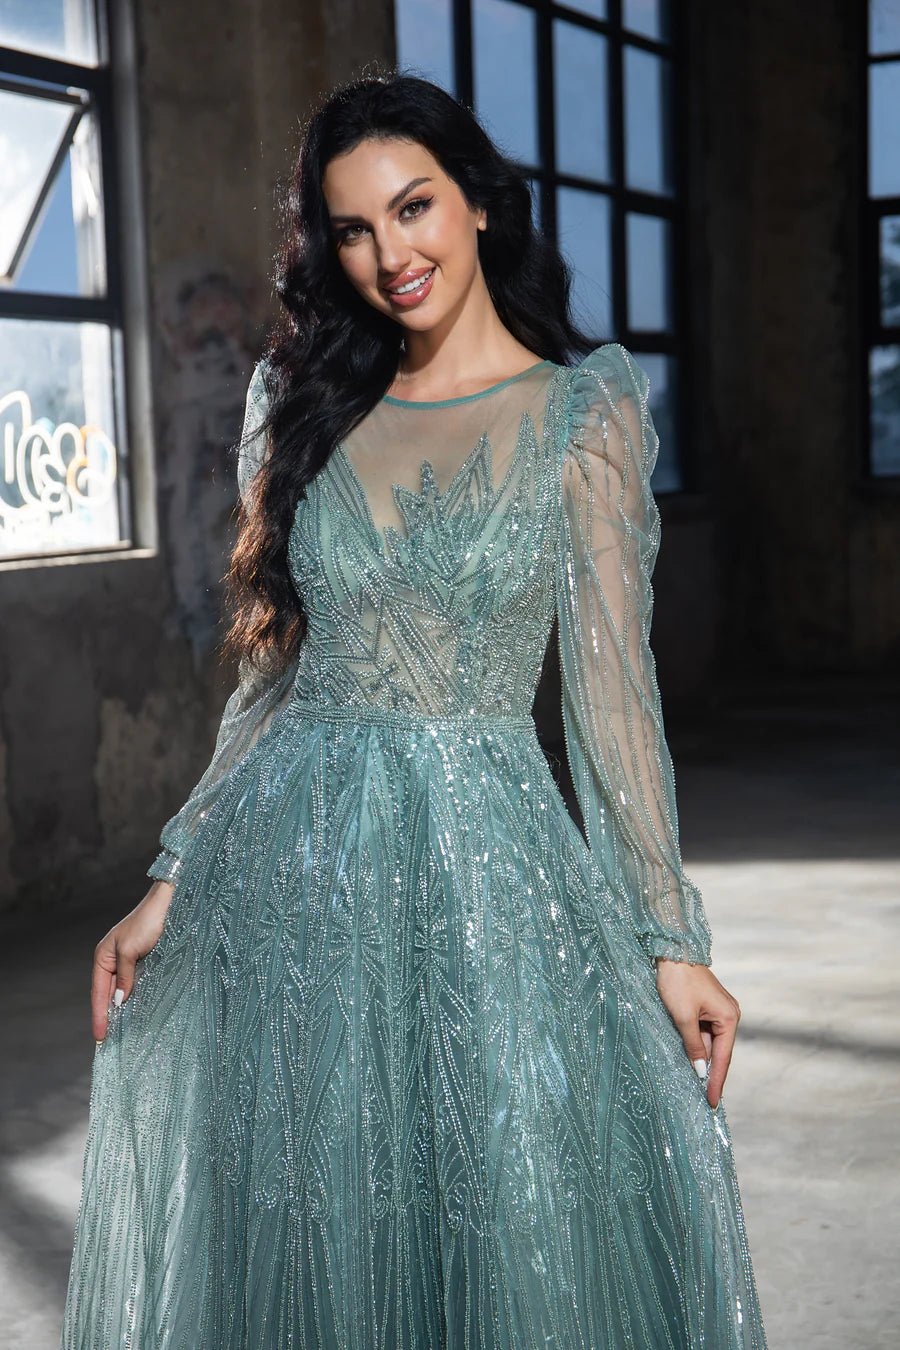 Elegant Teal Sequin Evening Gown with Sheer Long Sleeves - Designer Sequin Dress and Pretty Sequin Dress Plus Size - WonderlandByLilian